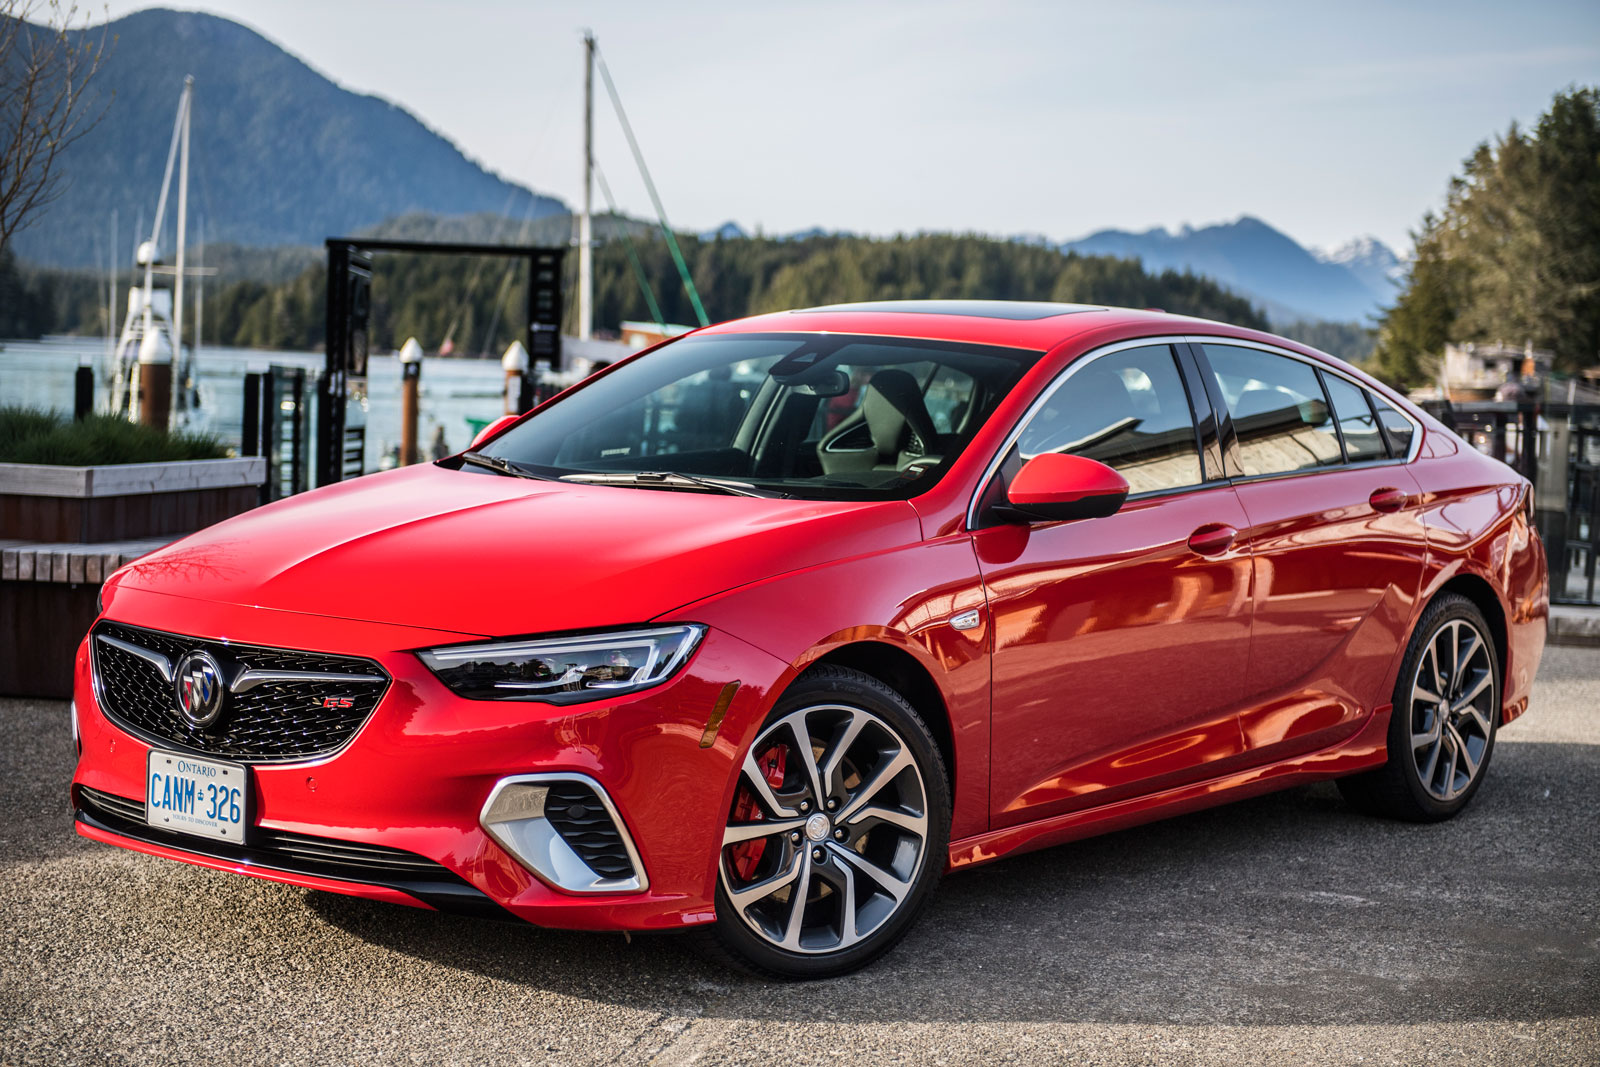 First Drive: 2018 Buick Regal GS – Yup, those are Brembos